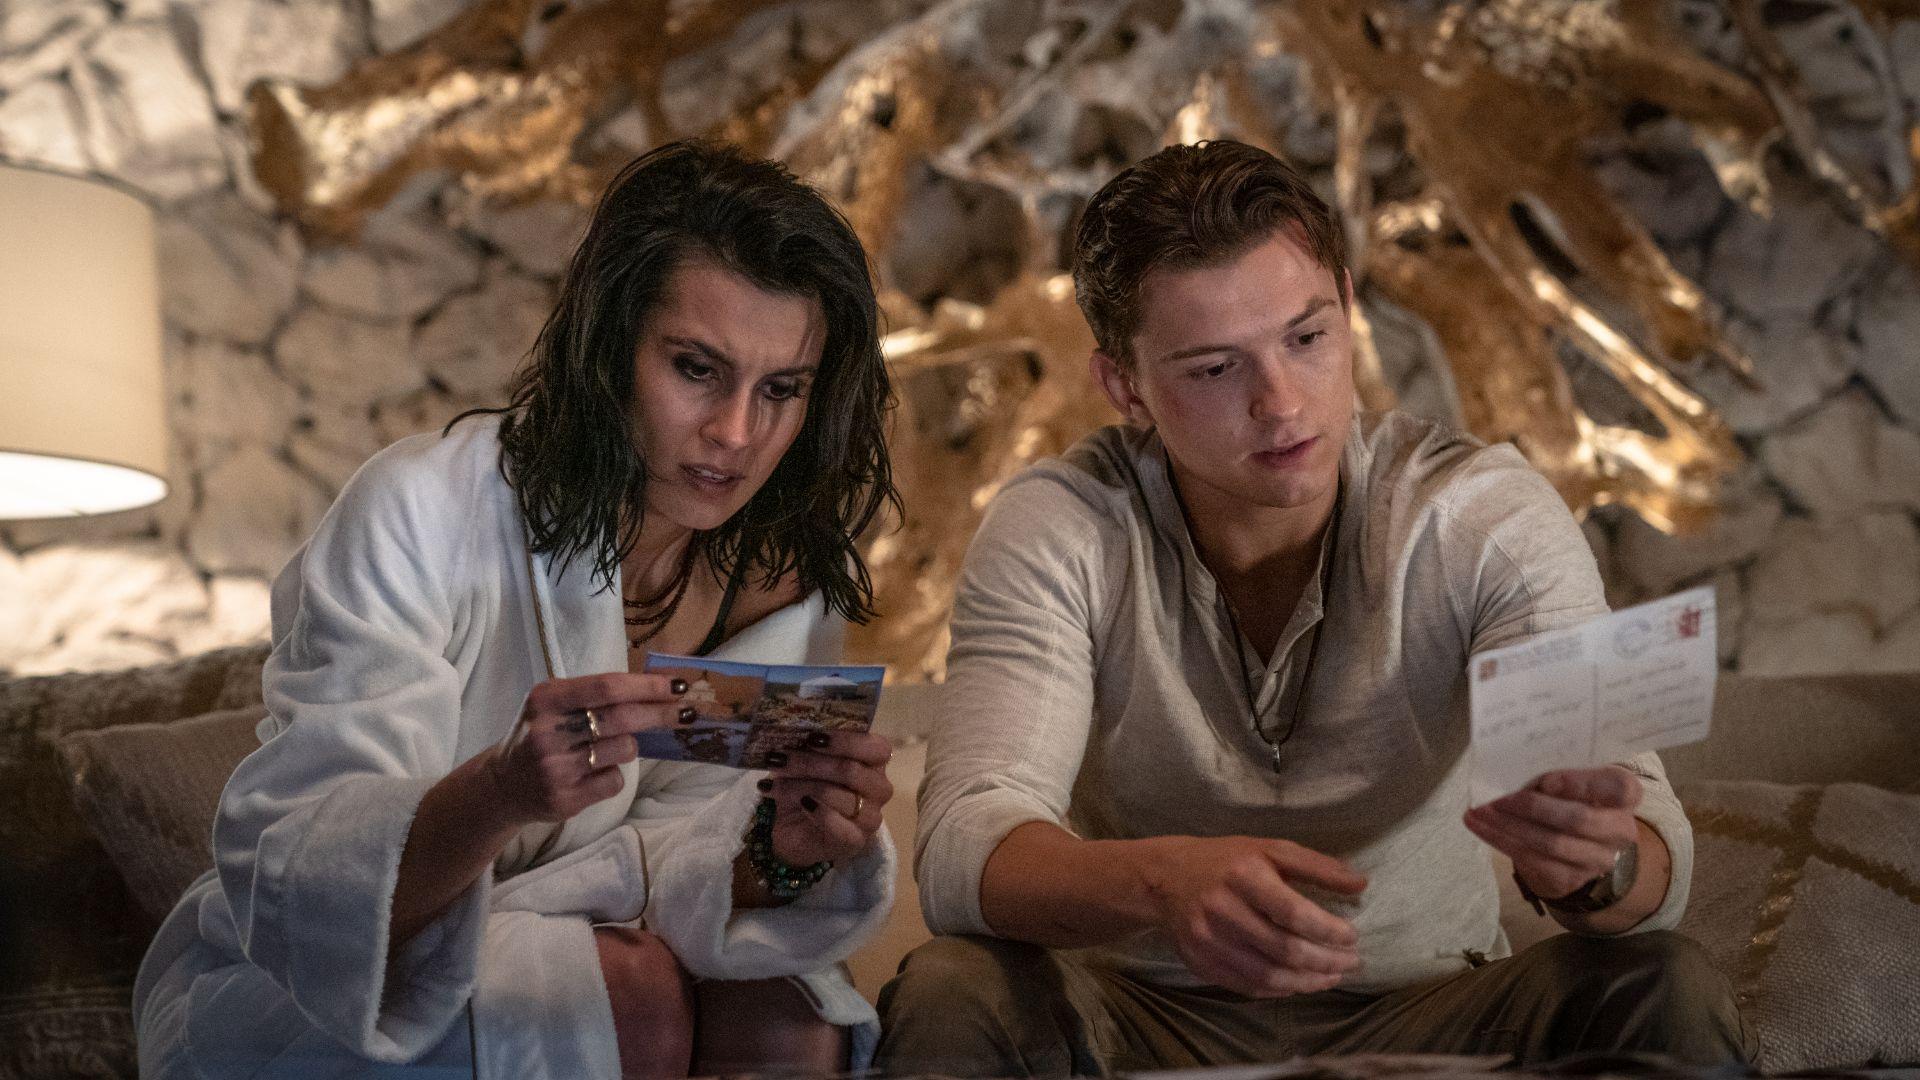 Tom Holland's Uncharted Movie Is Most Watched on Netflix